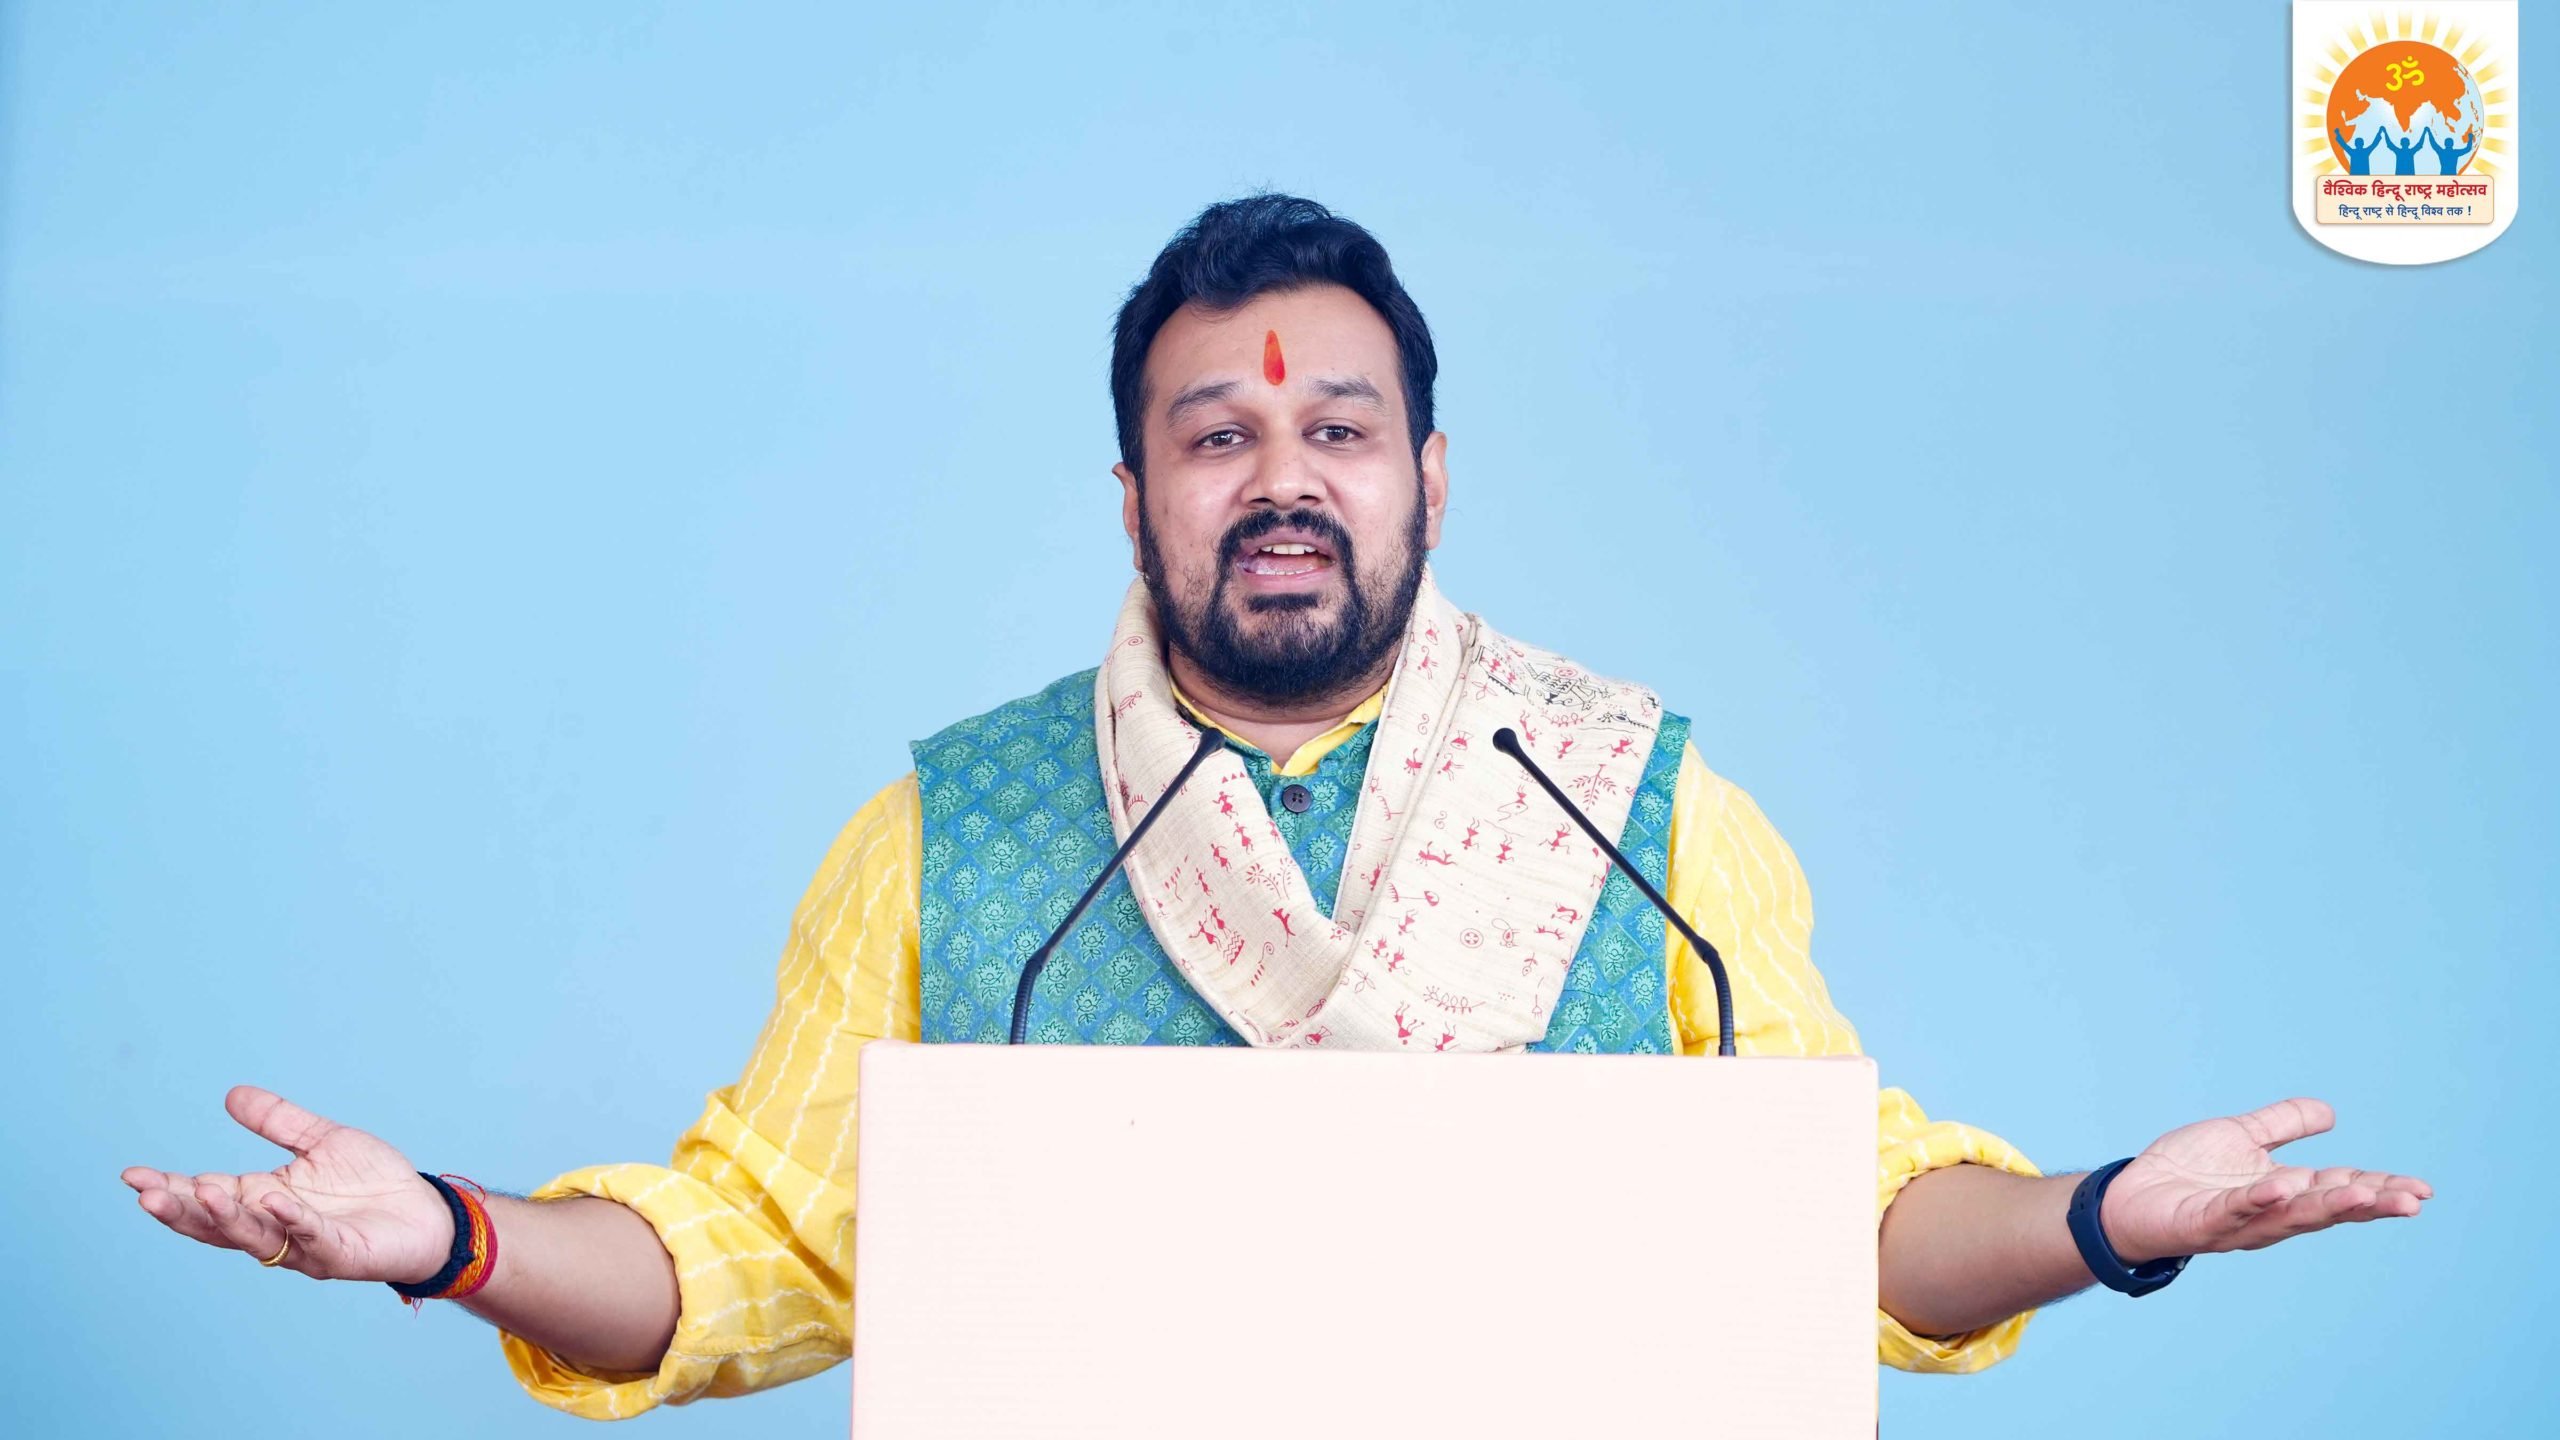 Adv. Vishnu Shankar Jain (Spokesperson, Hindu Front For Justice and Advocate, Supreme Court, Delhi), while addressing a session during the 'Vaishvik Hindu Rashtra Mahotsav' said, "Insertion of words - 'Secular' and 'Socialist' in the Constitution of India was unconstitutional".